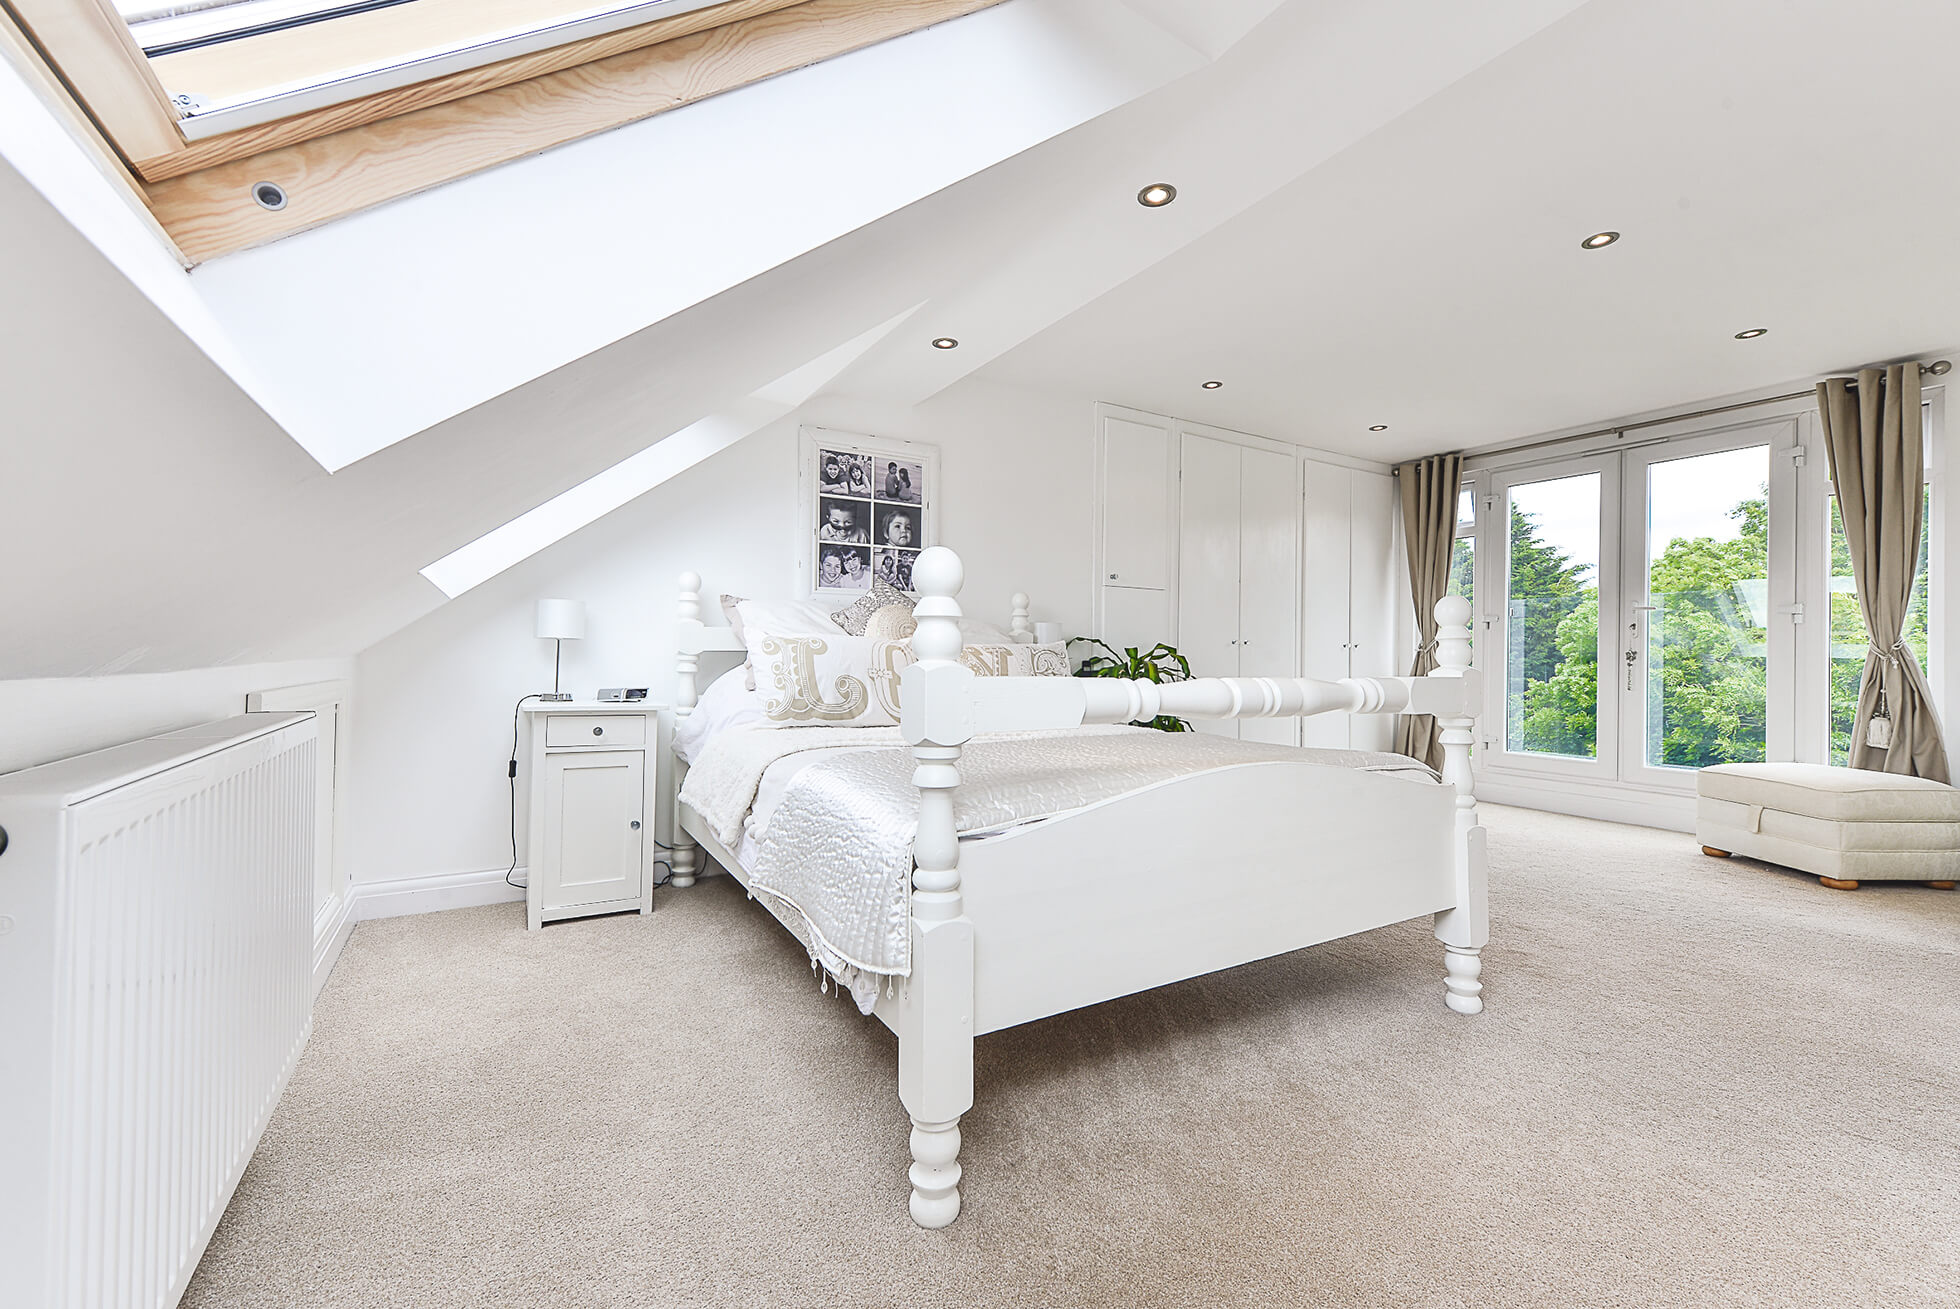 Do you have a question about converting your Loft in Cheshunt? Here are the most popular questions asked by our clients.